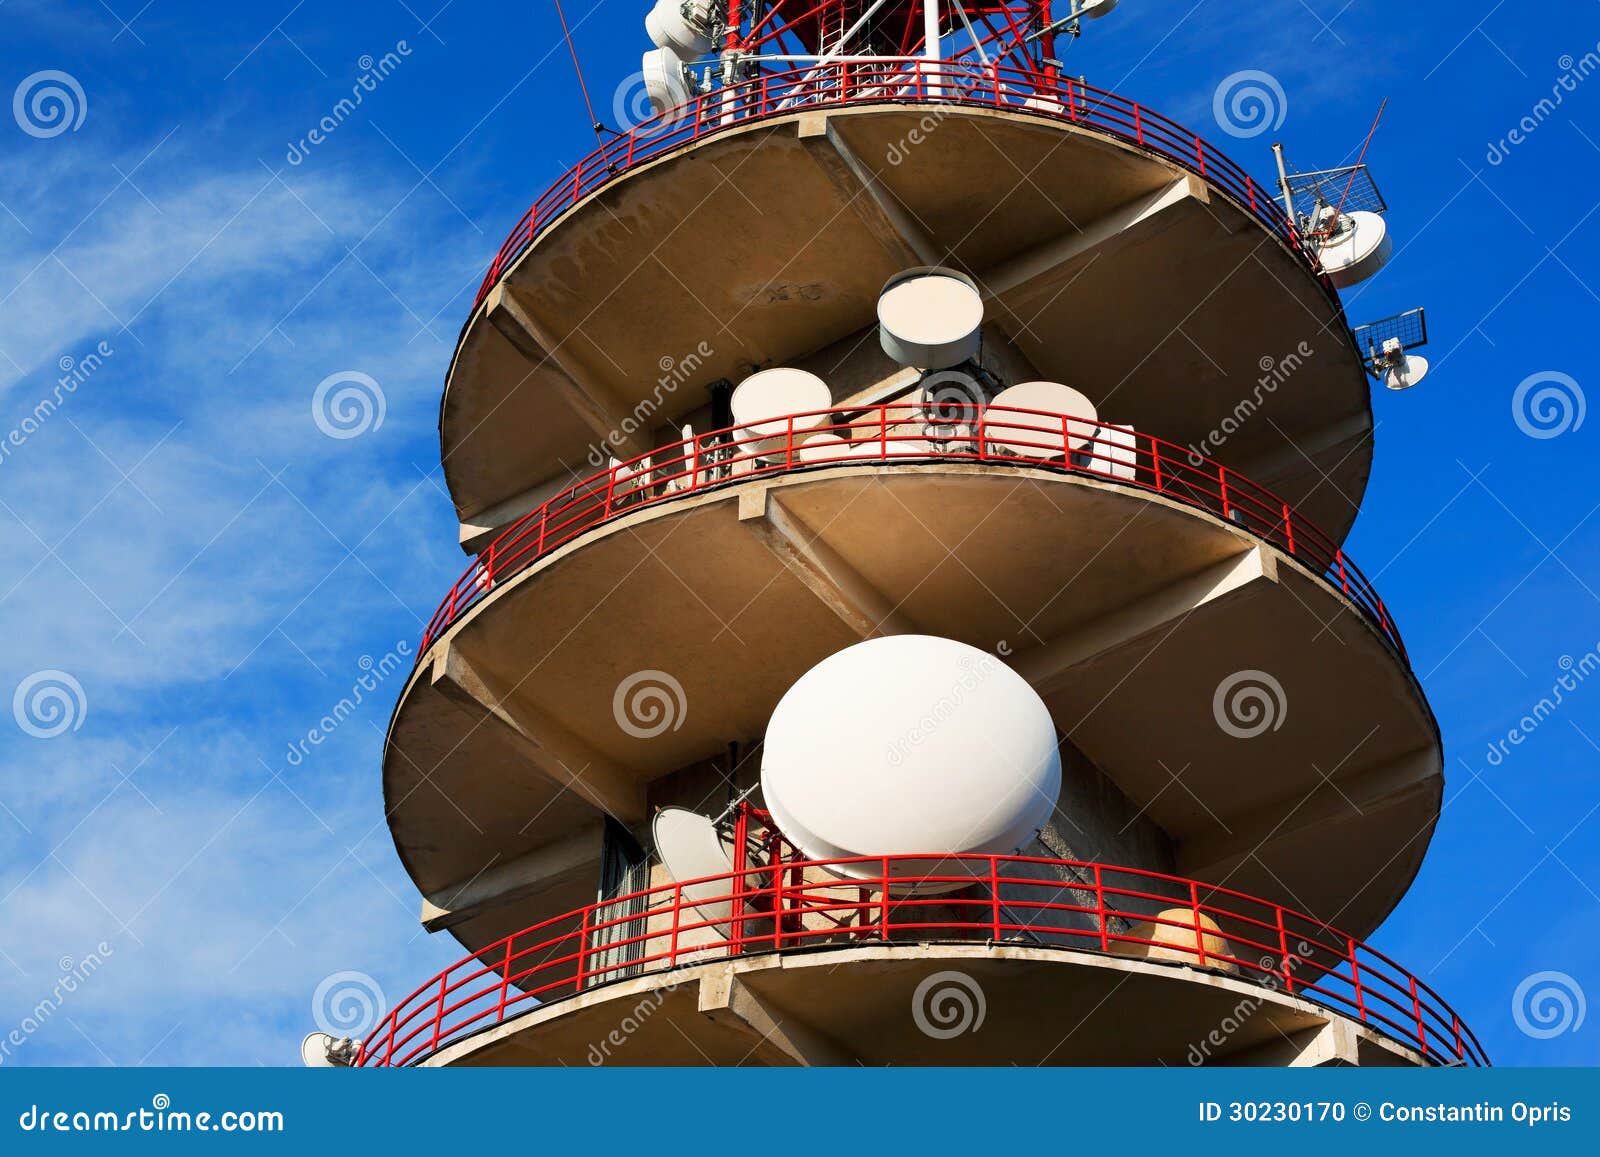 broadcasting tower and antennas